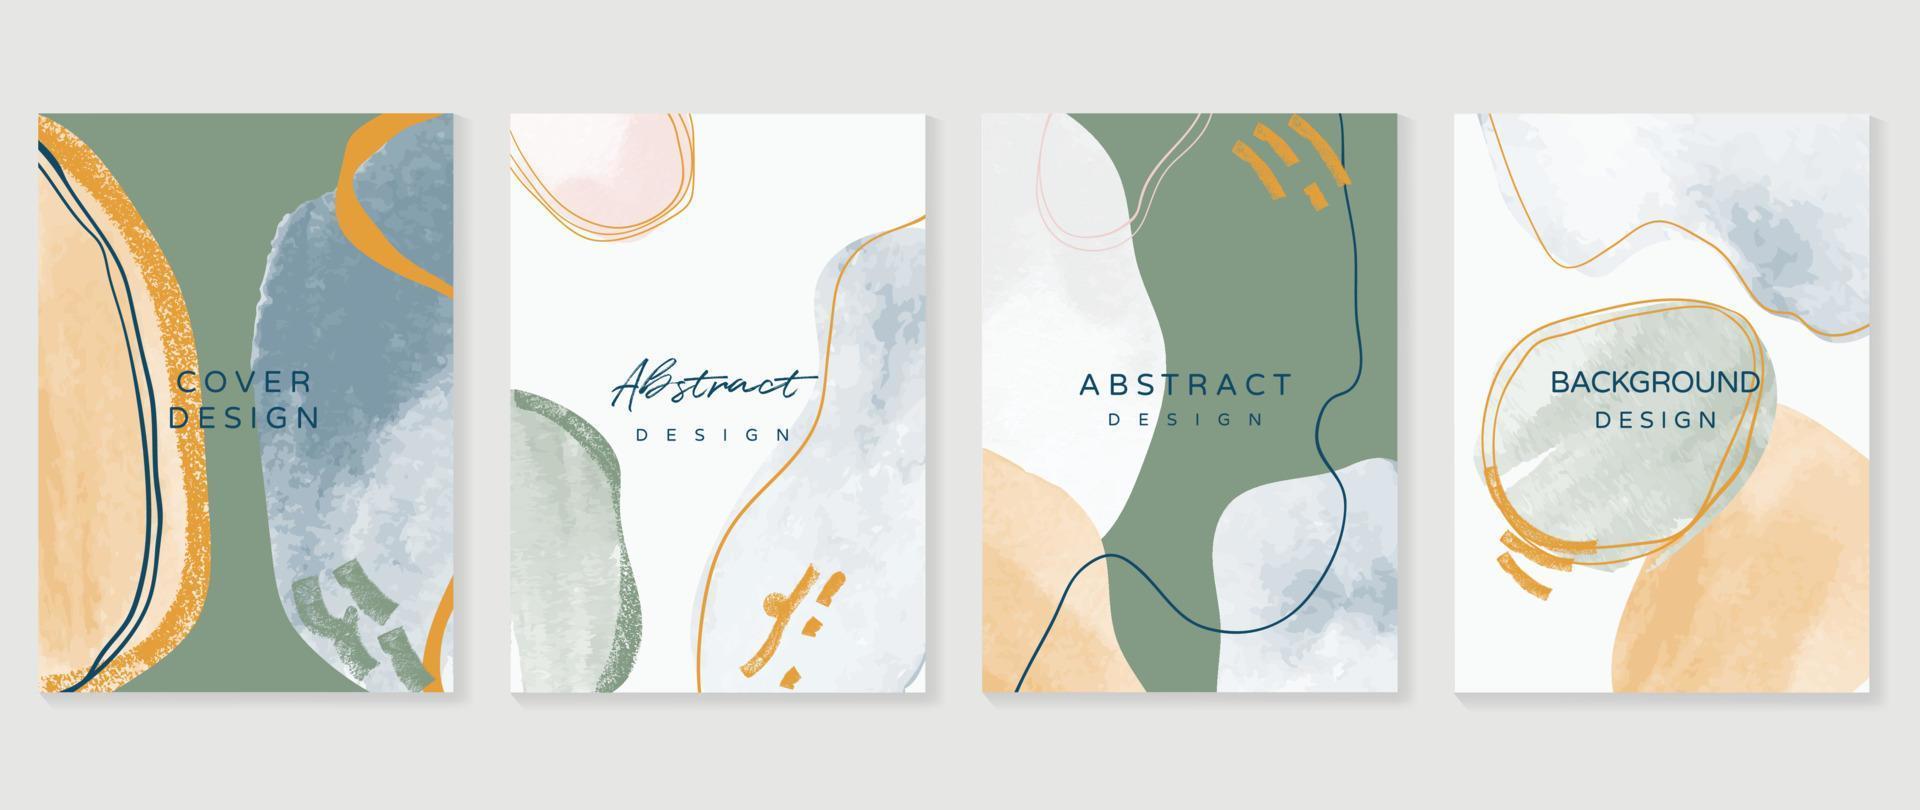 Abstract design cover set vector illustration. Creative background template with abstract watercolor organic shapes and line arts. Design for greeting card, invitation, social media, poster, banner.